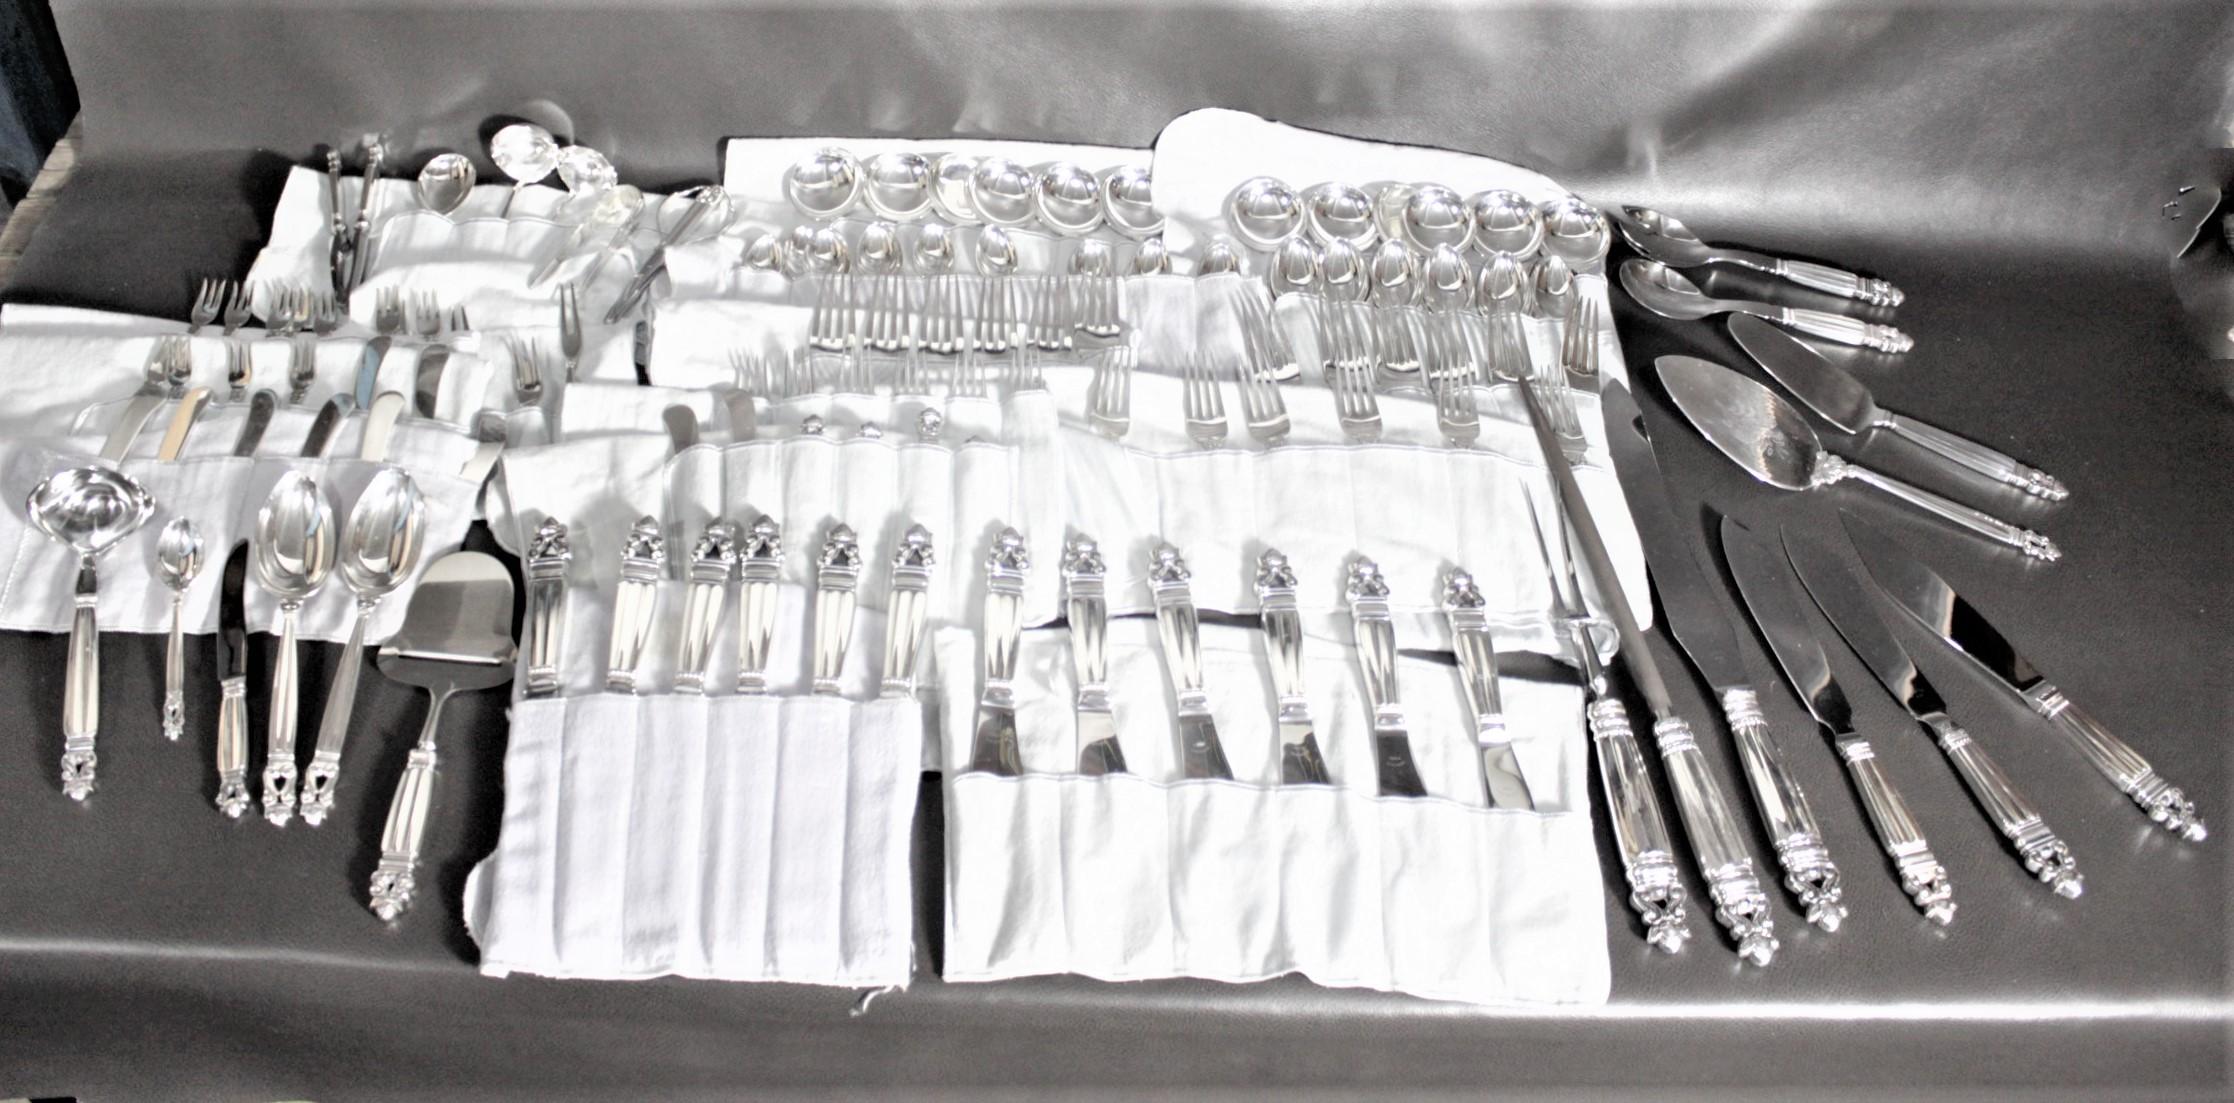 This extremely large sterling silver flatware set was made by Georg Jensen in Denmark in circa 1960 in an Art Deco style. This is Jensen's 'Acorn' pattern and is a complete service for twelve with several considerably rare serving pieces, such as